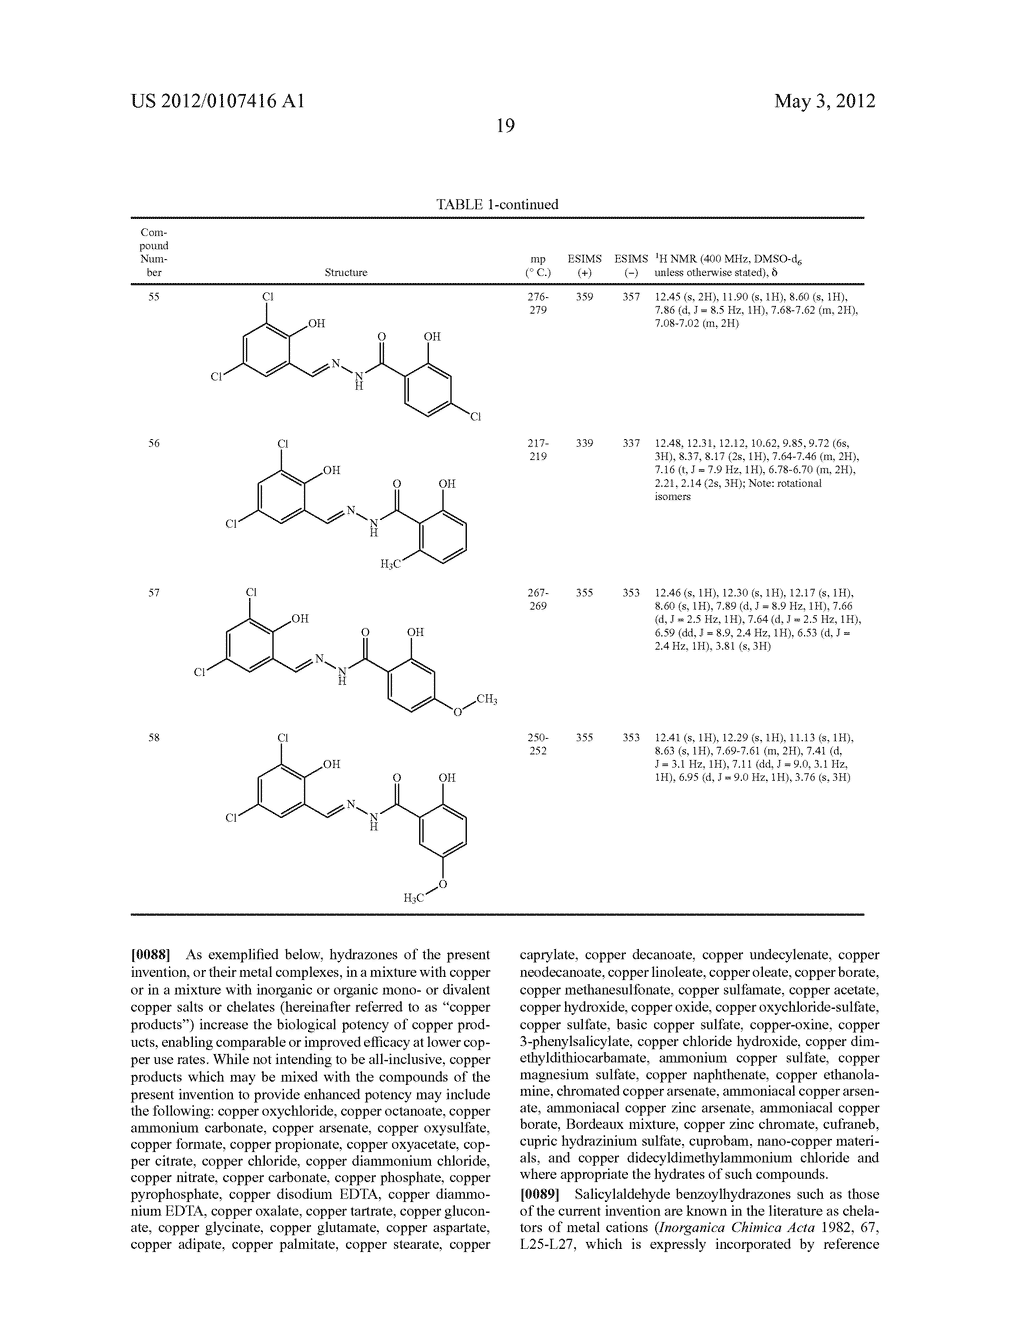 FUNGICIDAL COMPOSITIONS INCLUDING HYDRAZONE DERIVATIVES AND COPPER - diagram, schematic, and image 20